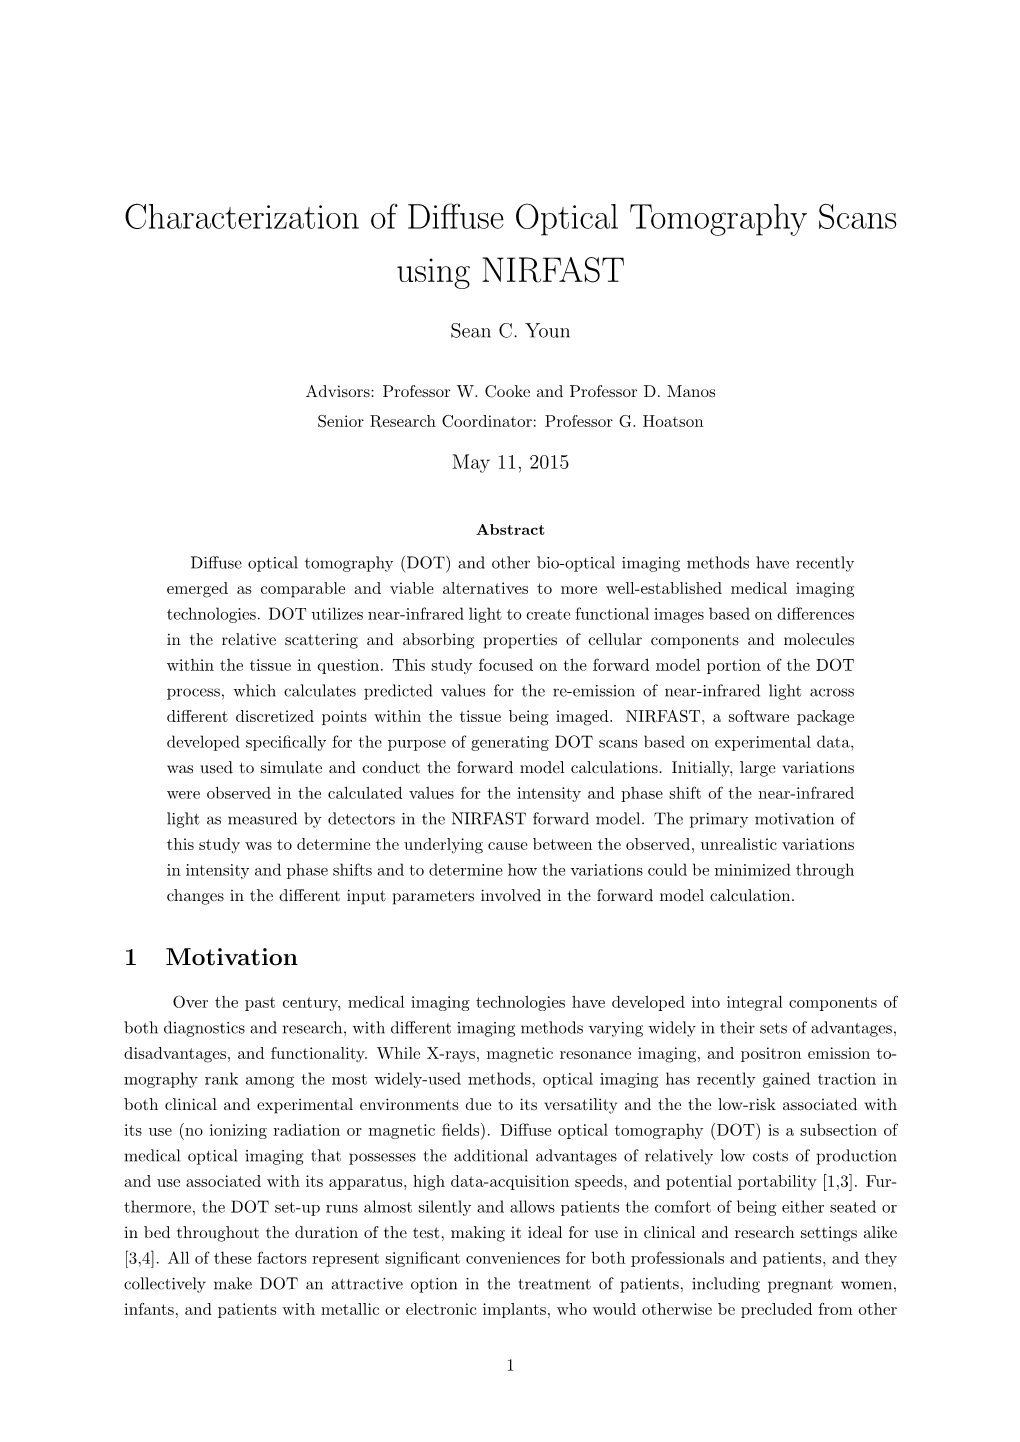 Characterization of Diffuse Optical Tomography Scans Using NIRFAST